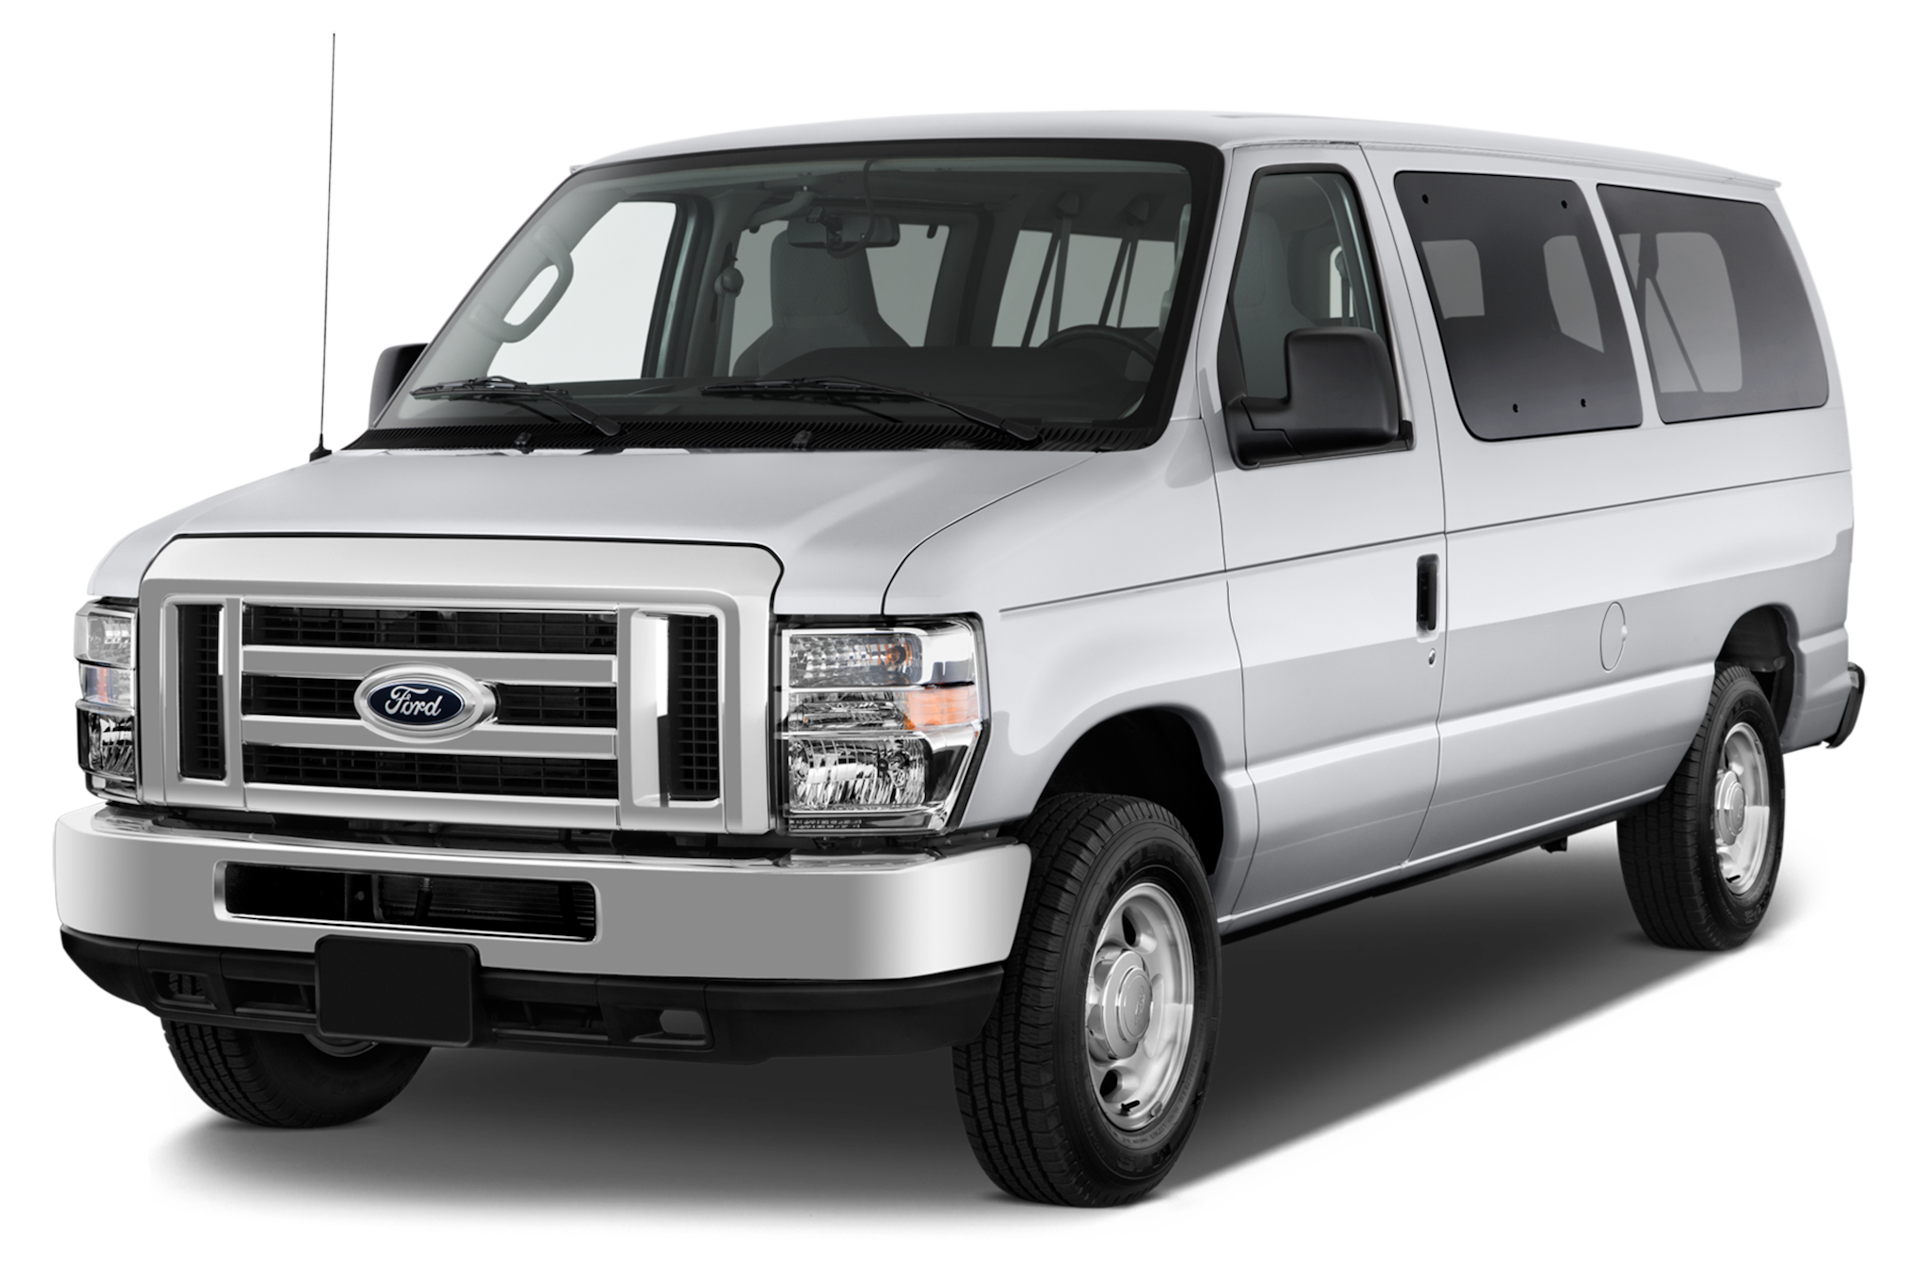 2013 Ford E-150 Prices, Reviews, and Photos - MotorTrend